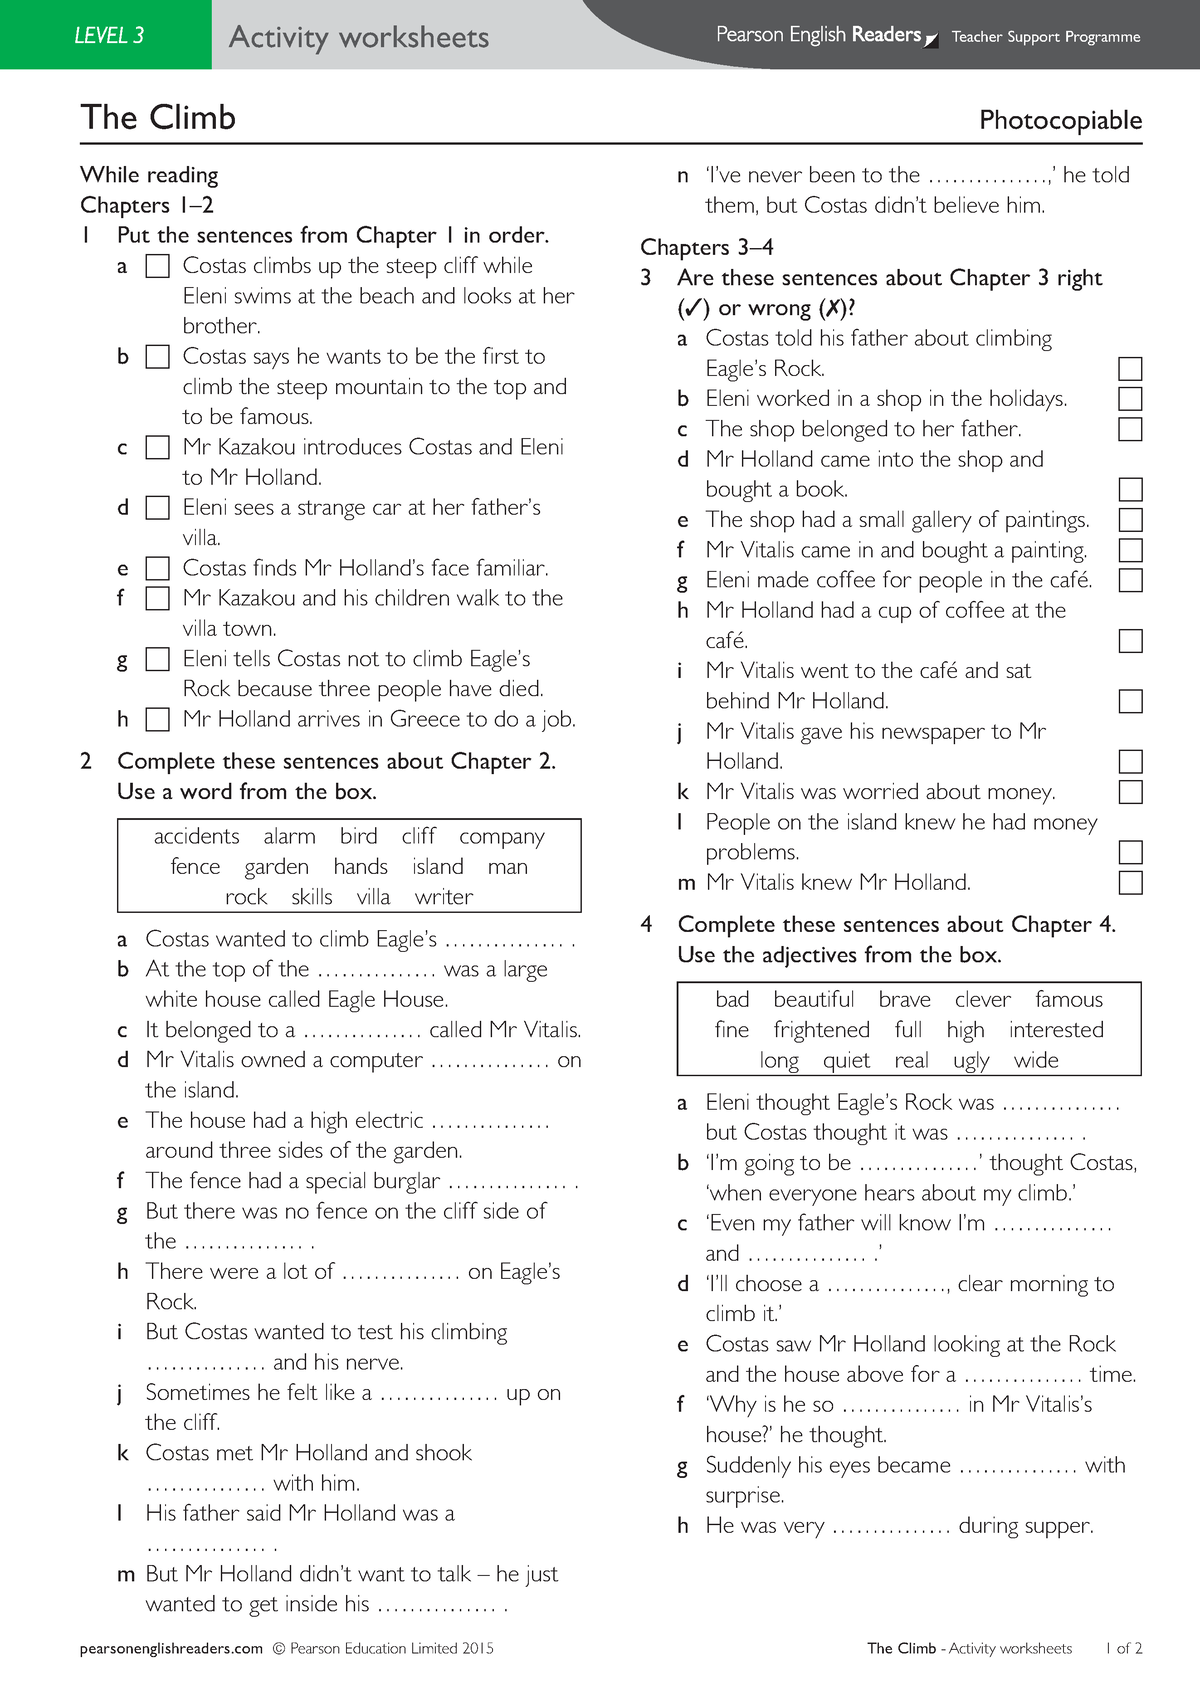 pearson education limited 2010 photocopiable answer key